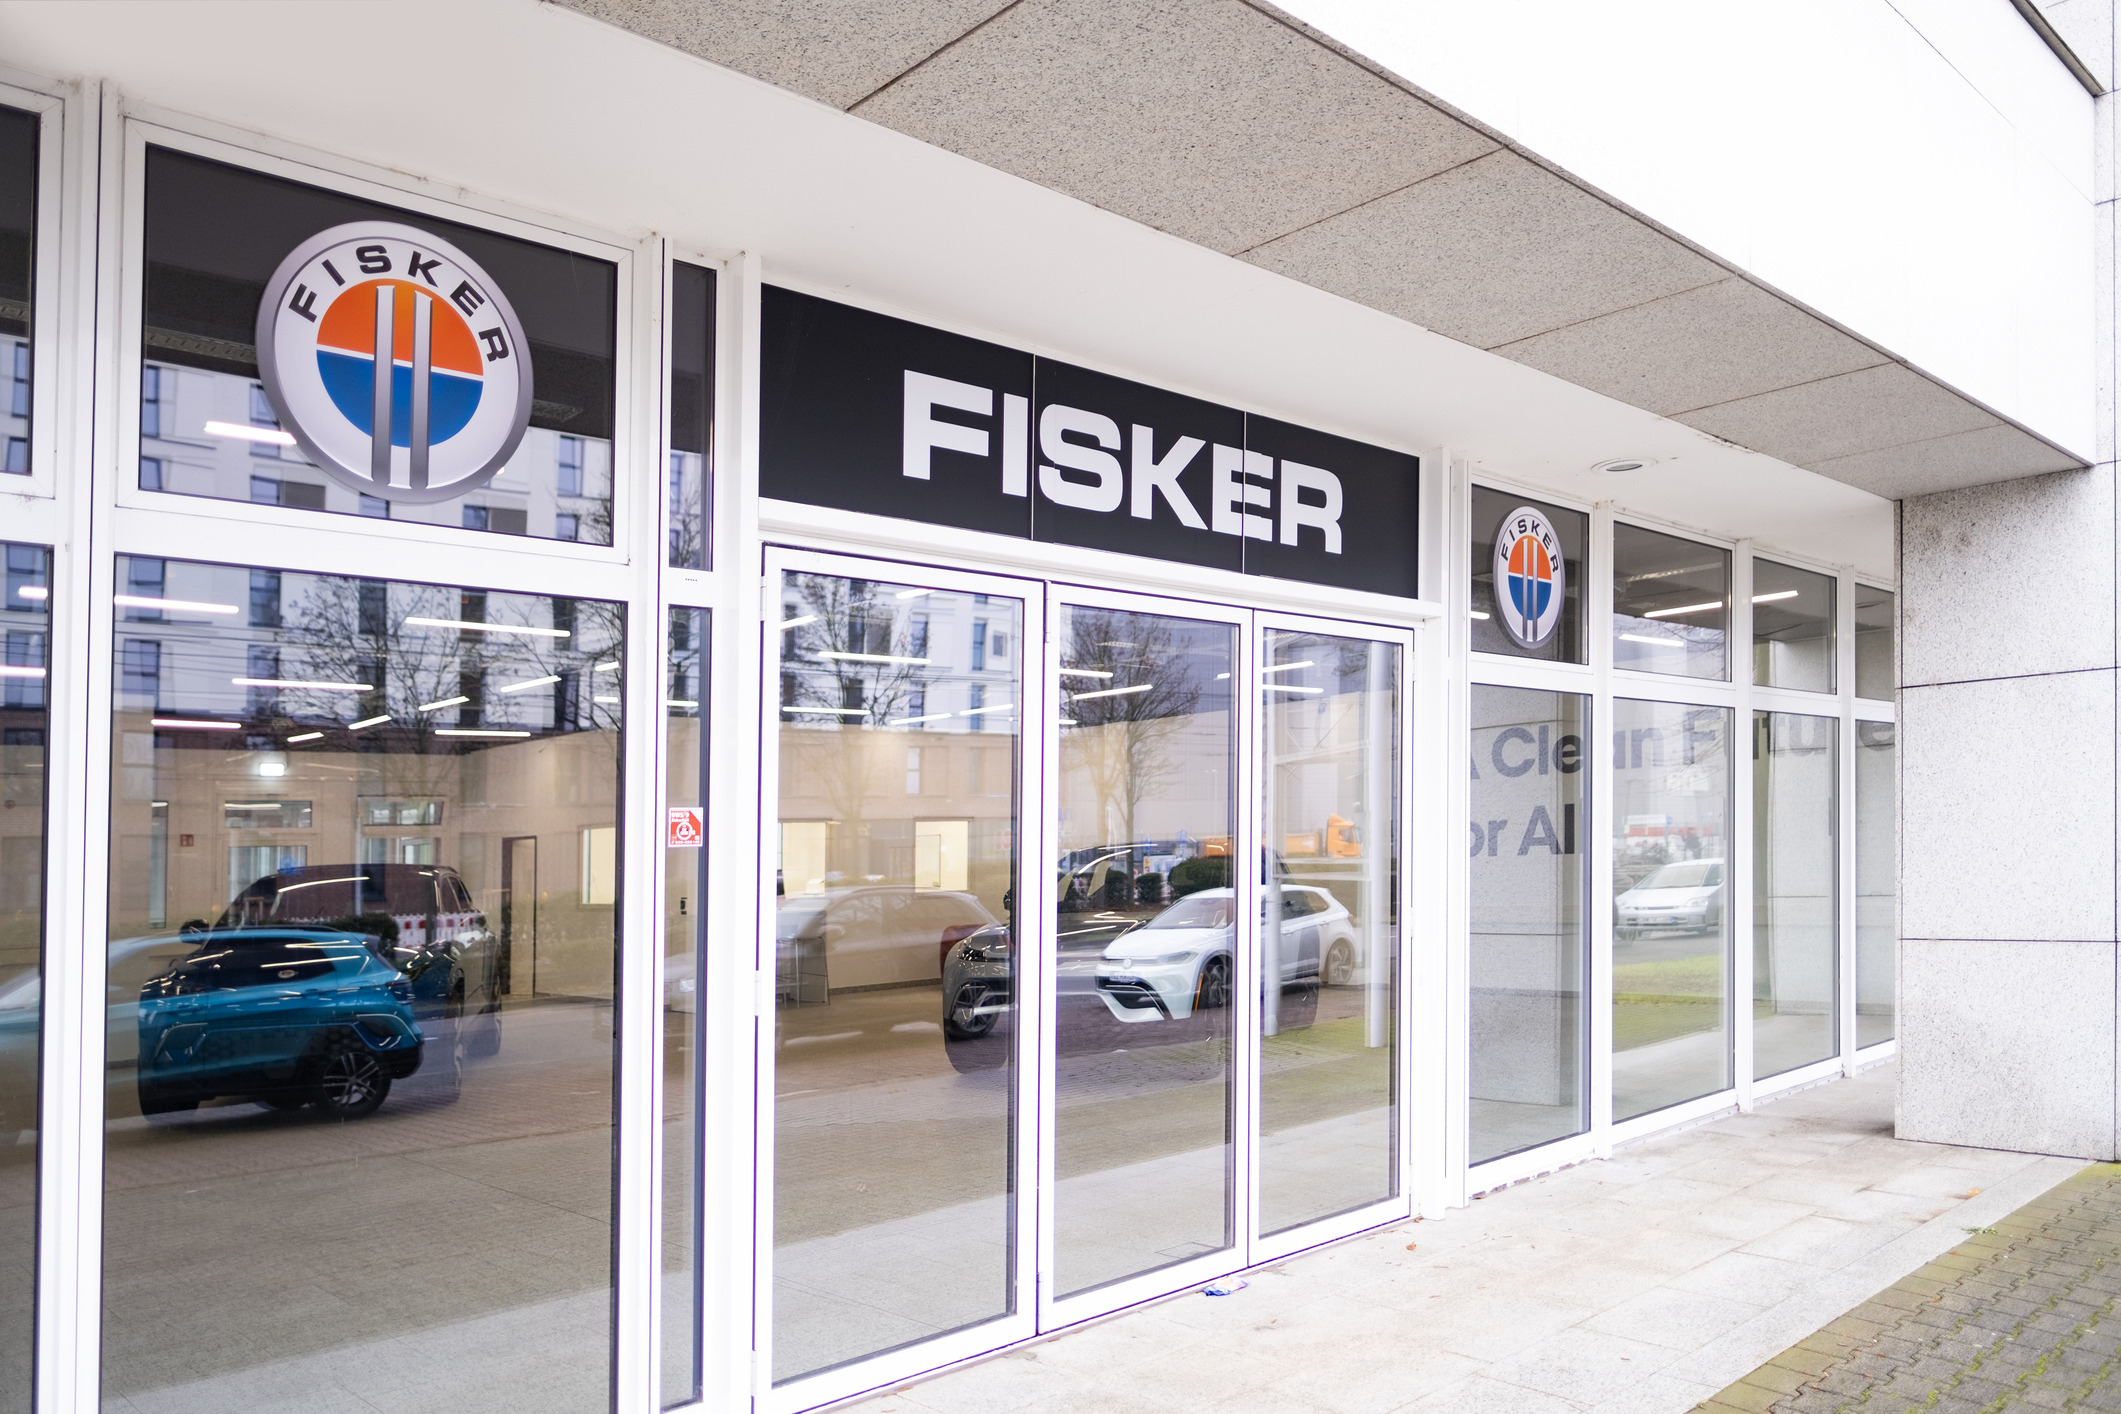 Fisker Announces More Layoffs as Bankruptcy Looms